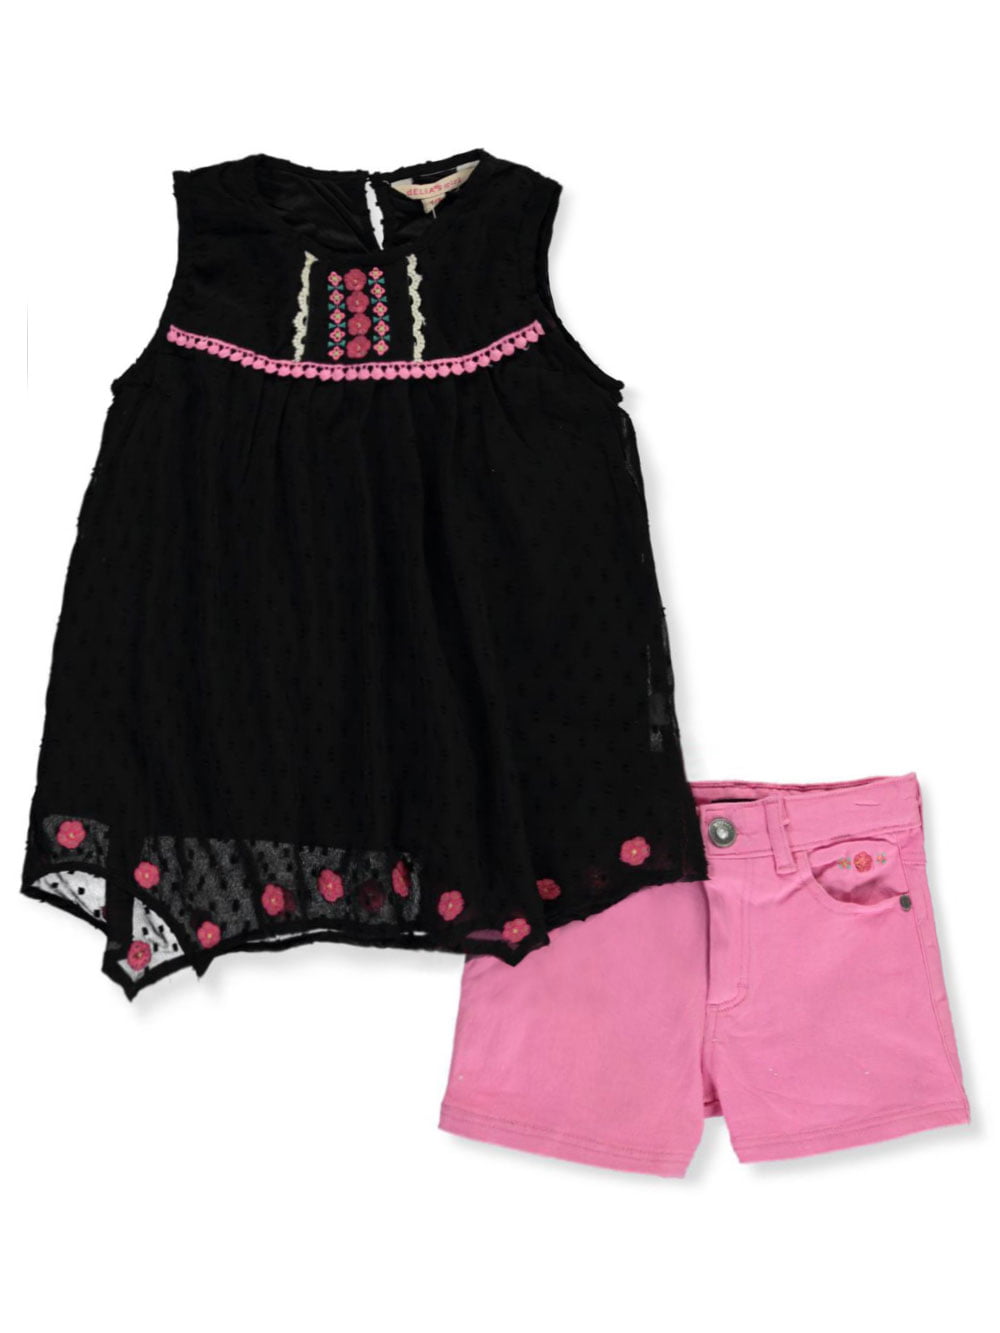 Delias Girls Embroidered Clip Spot 2-Piece Shorts Set Outfit